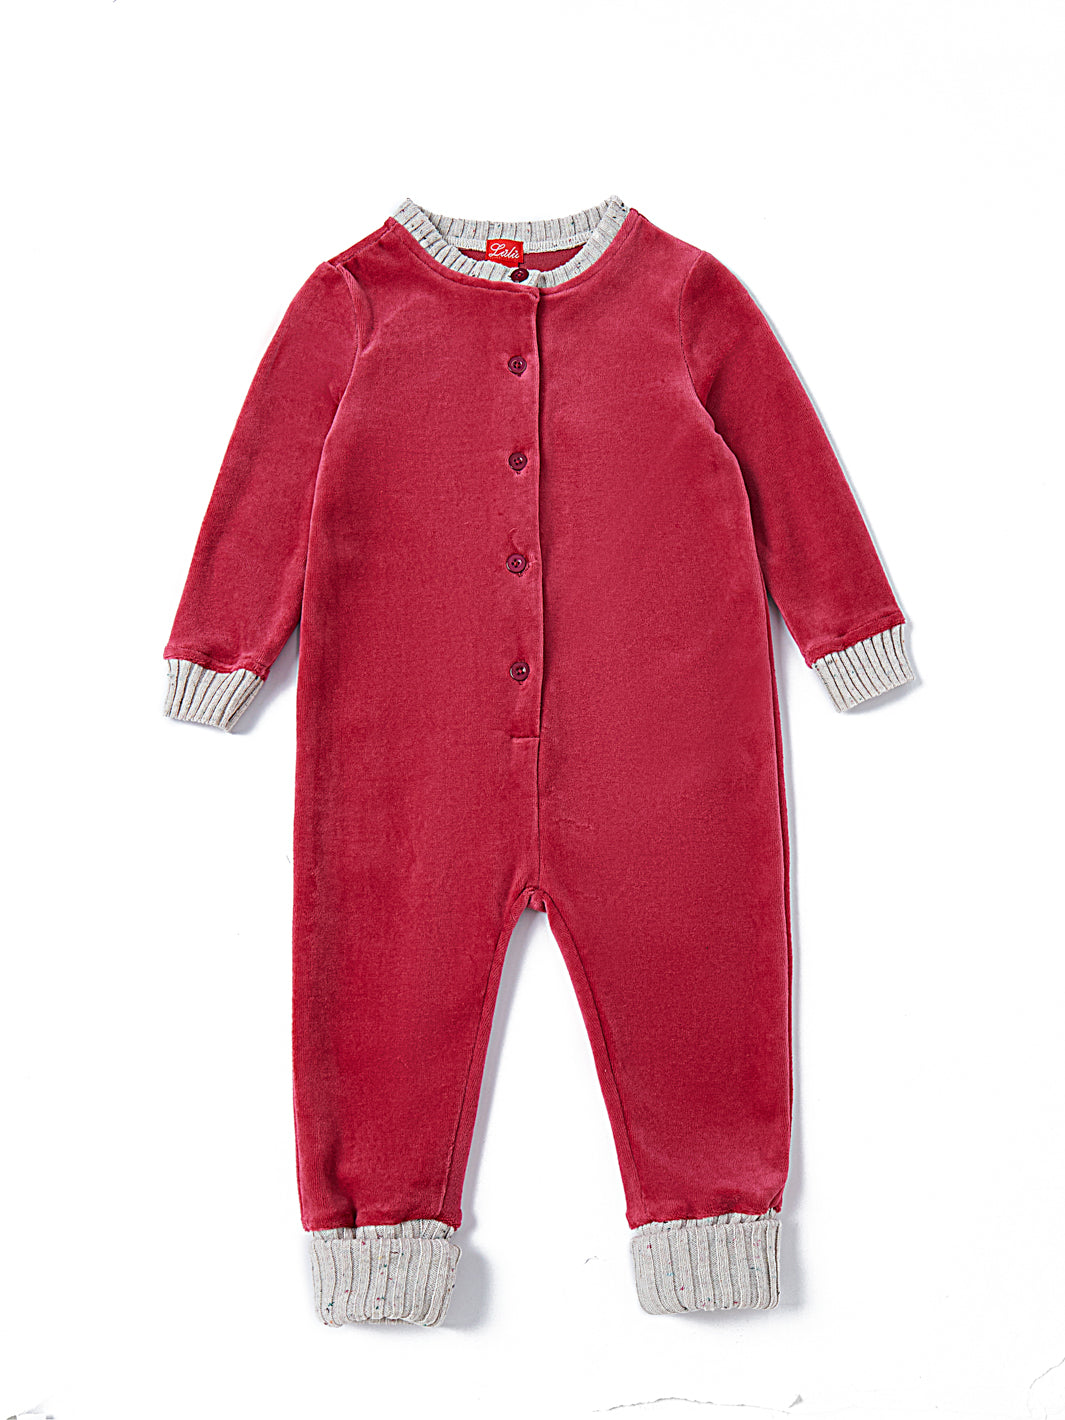 Baby Velour Overall - Rose